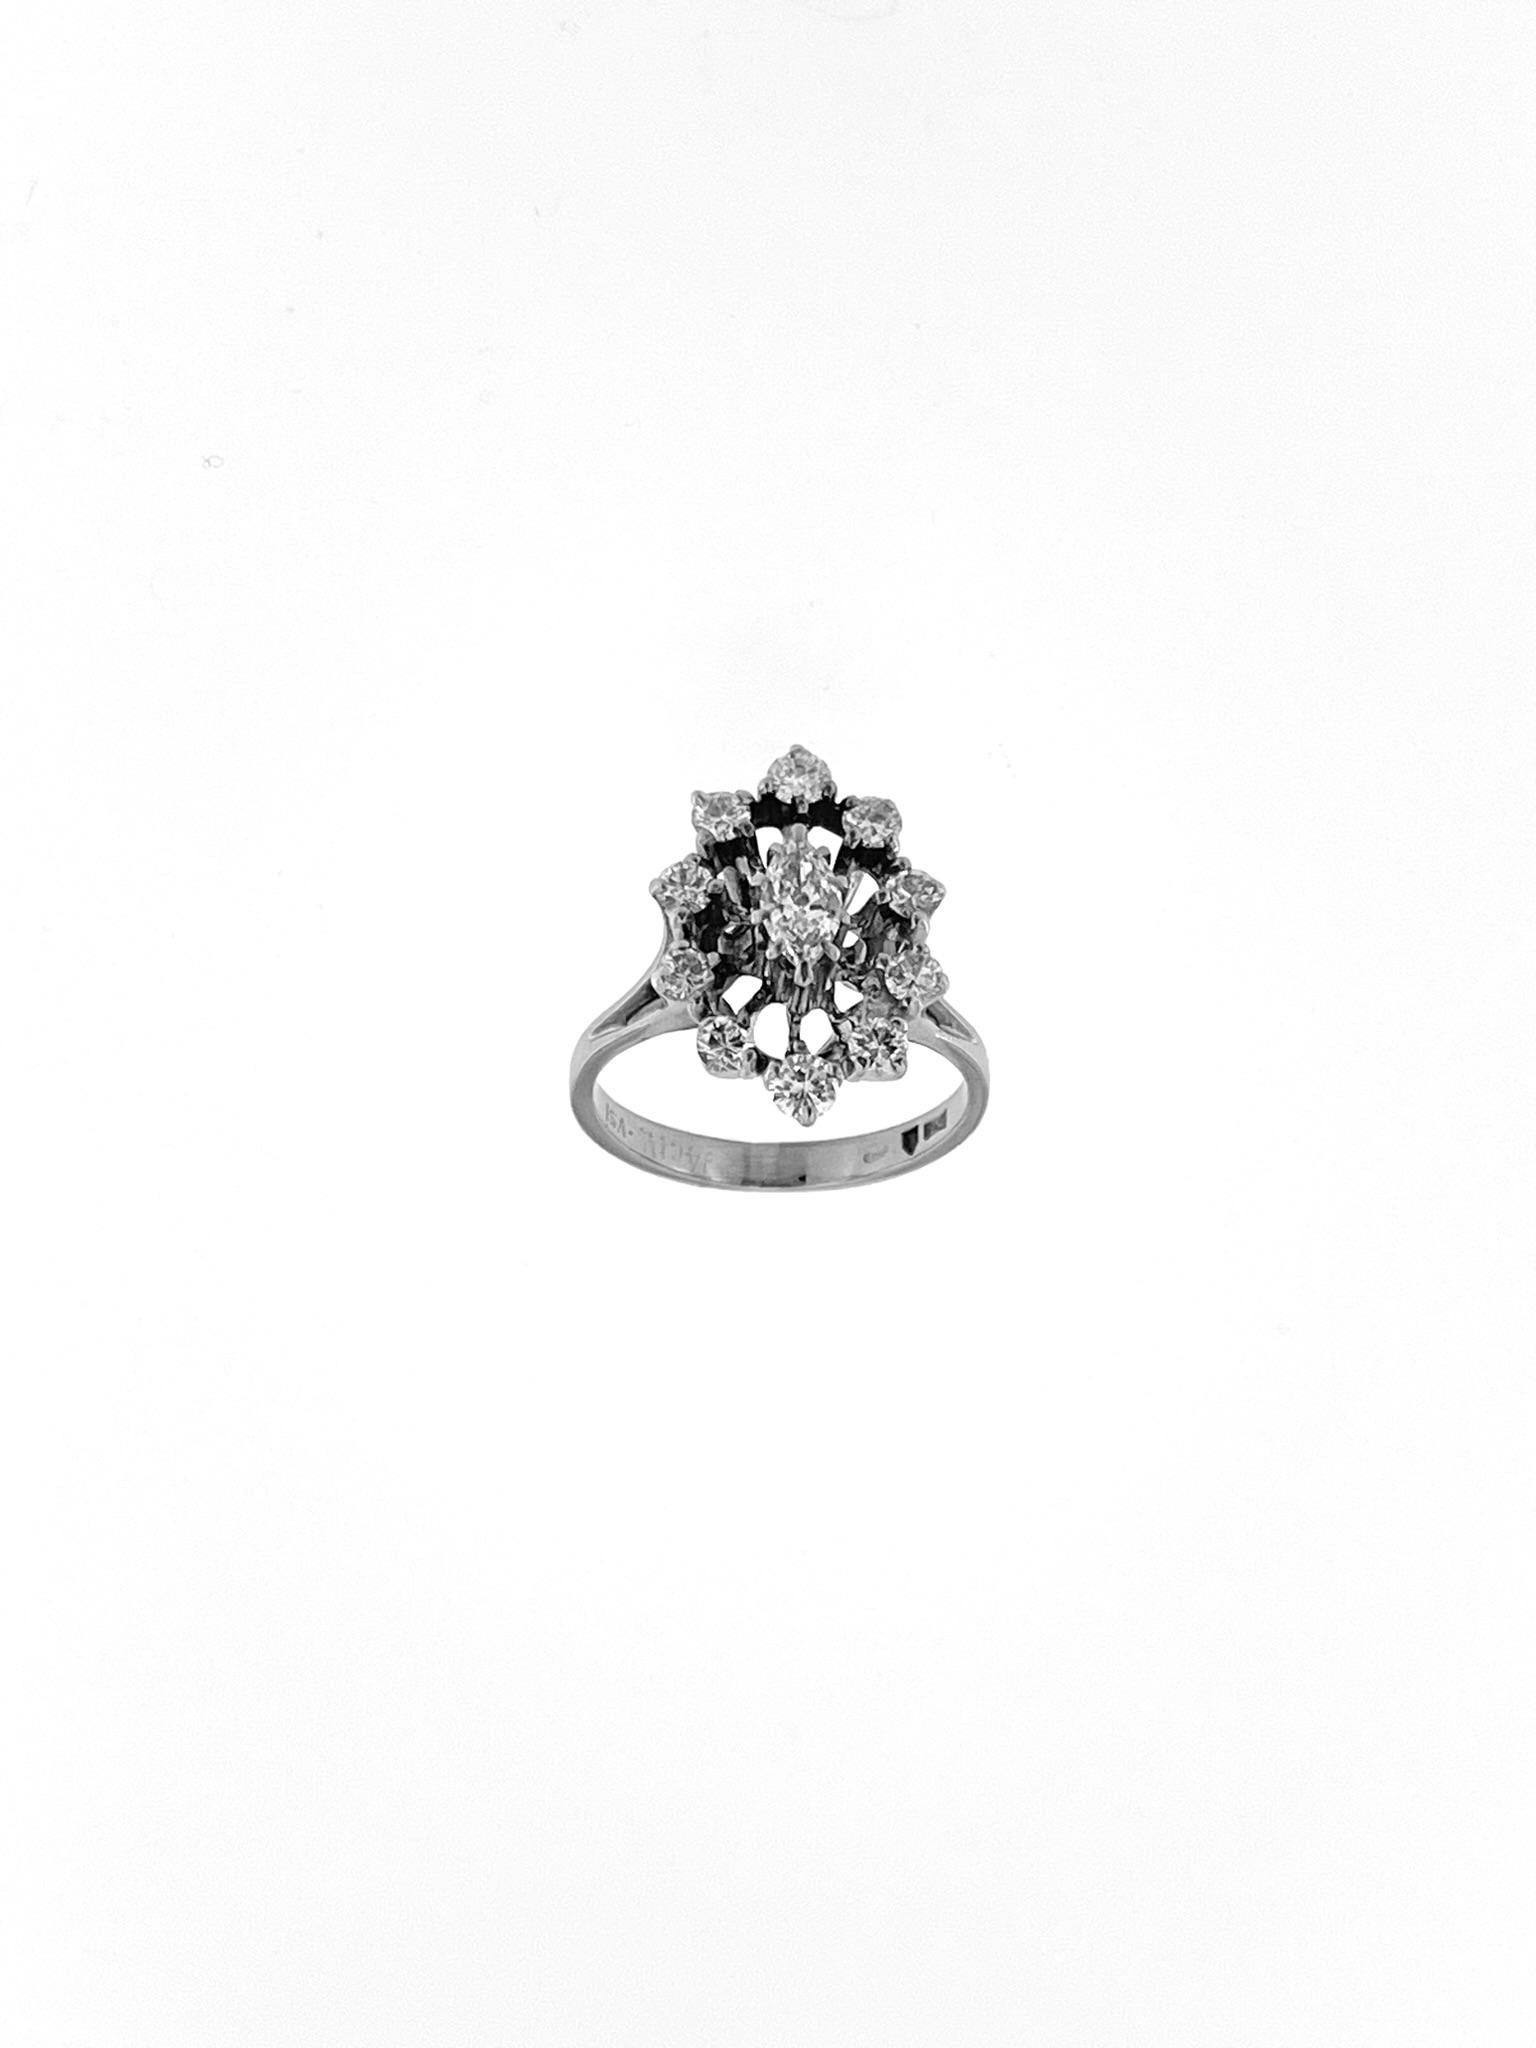 Mixed Cut HRD Certified White Gold Art Deco Cocktail Ring with Diamonds For Sale